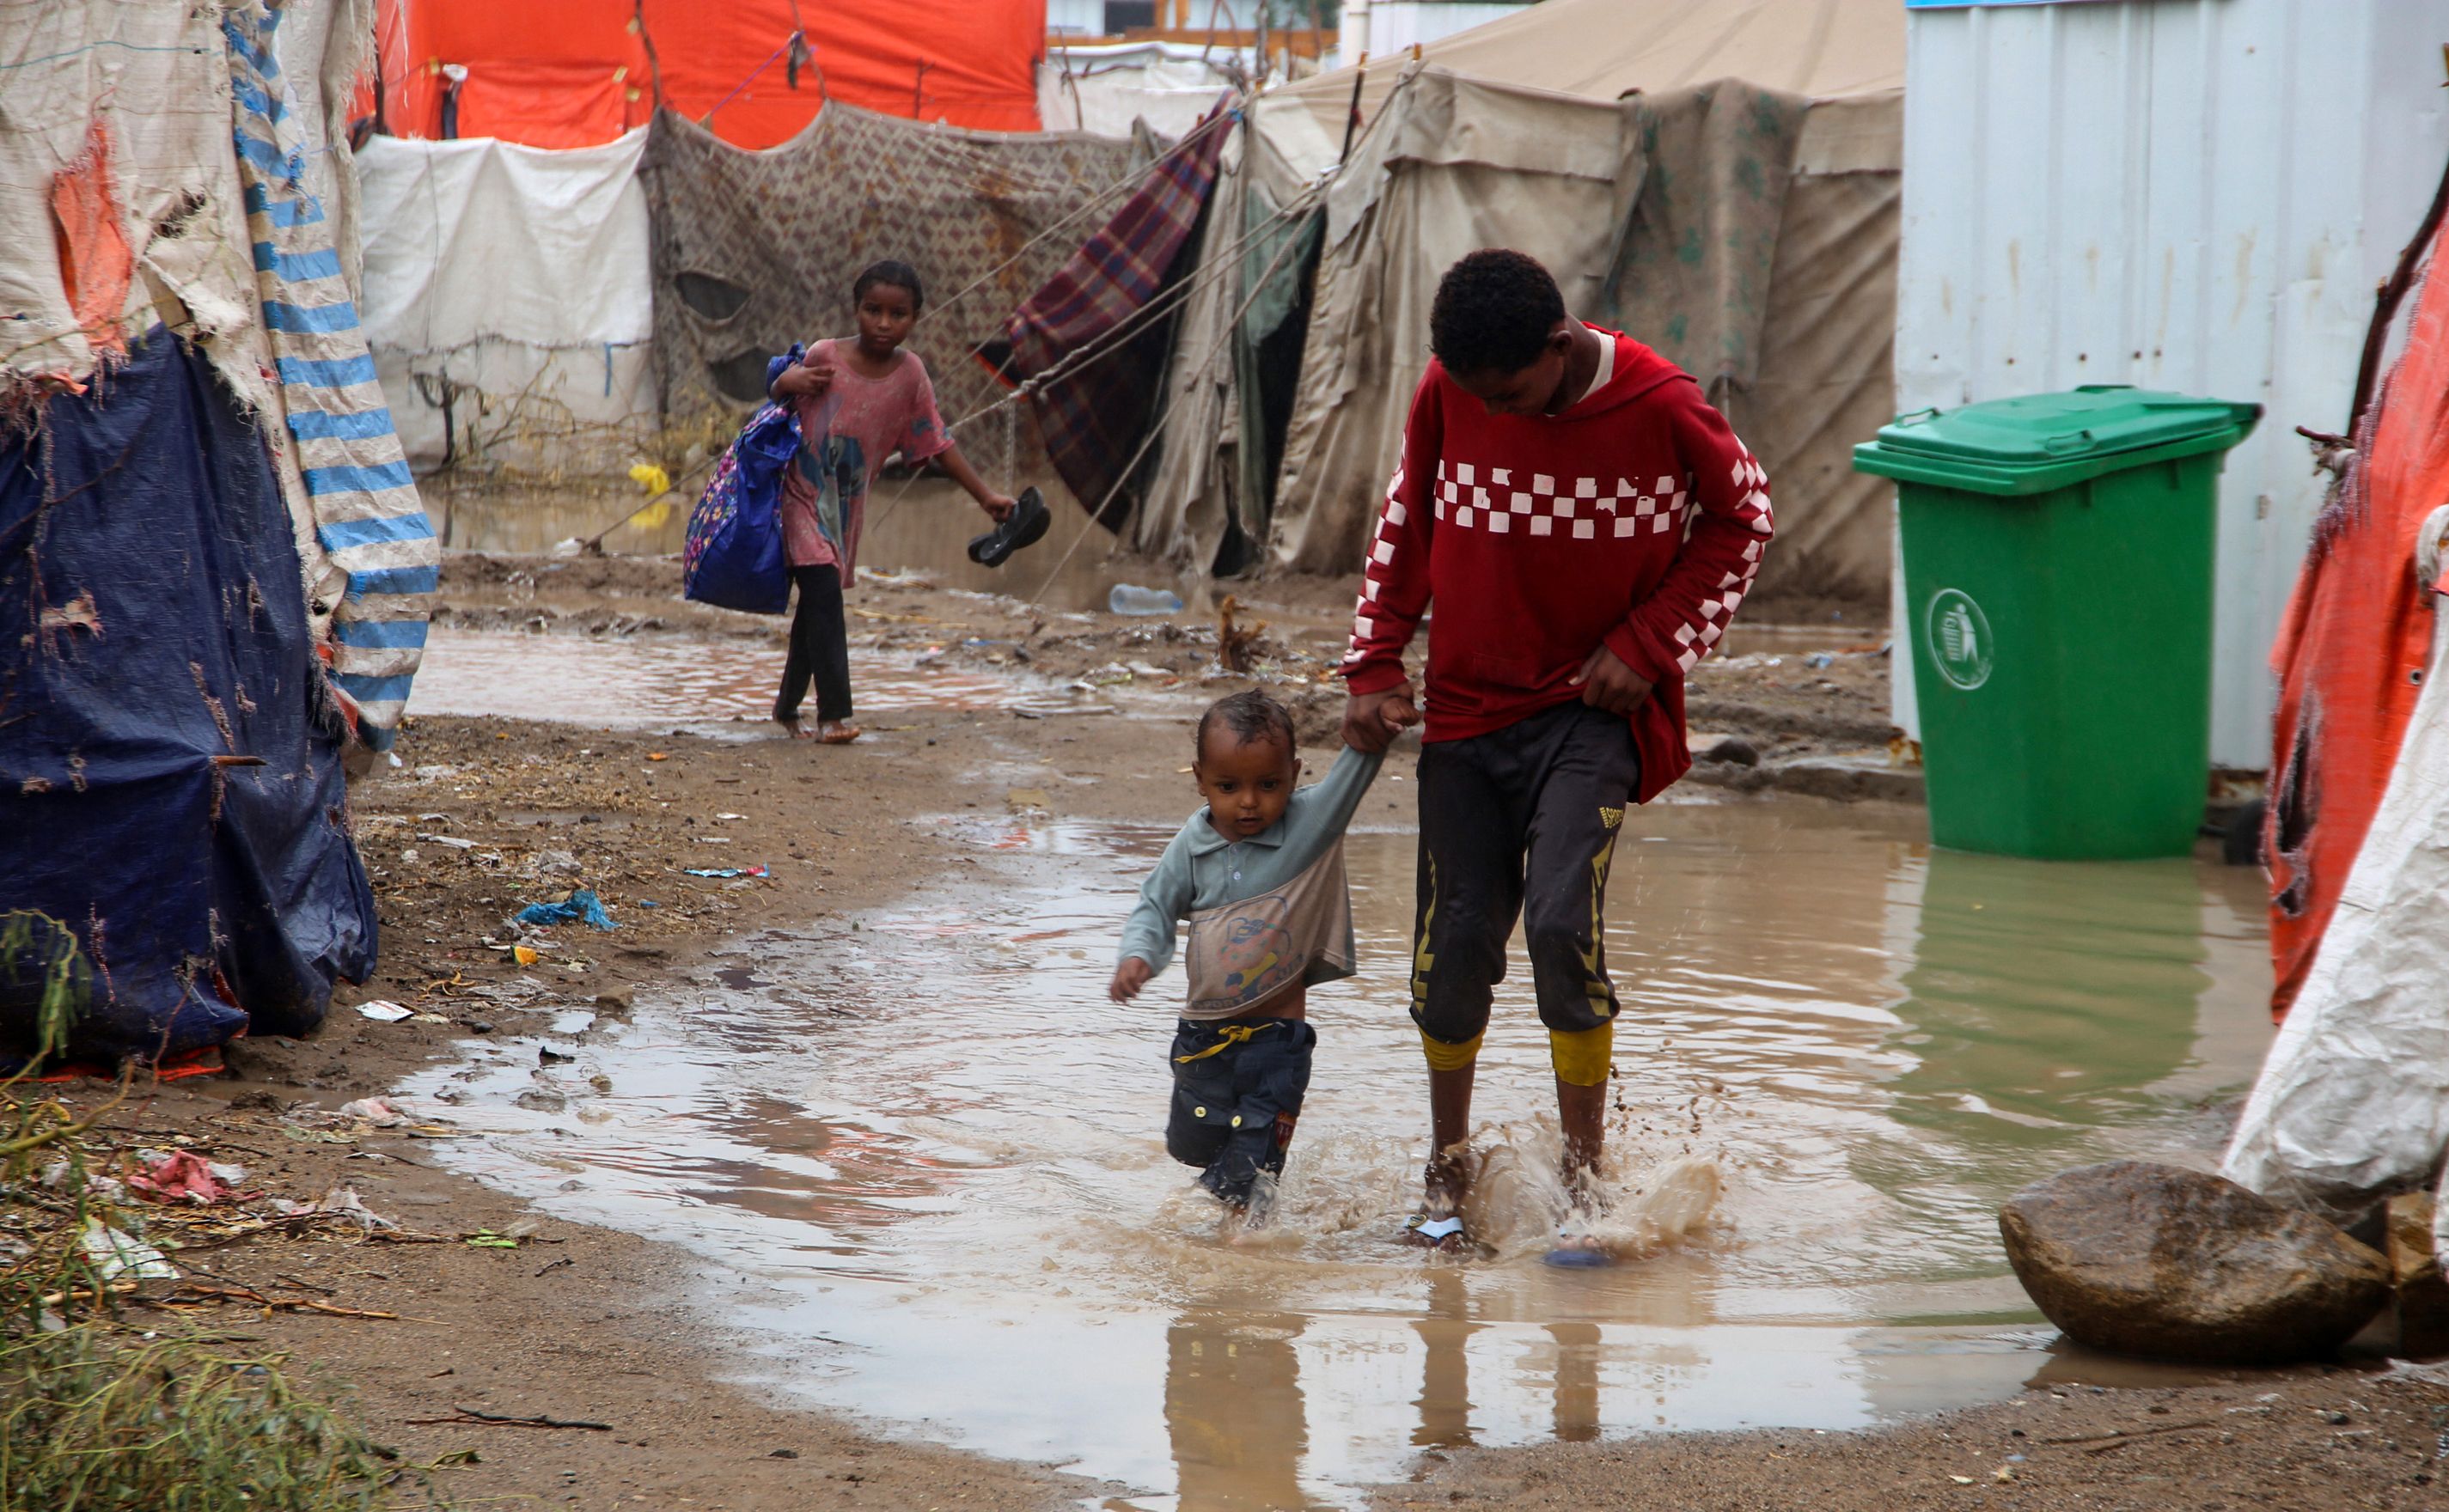 Children walk in flood water outside tents damaged by torrential rain, at a camp for internally displaced people in the Khokha district of Yemen's war-ravaged western province of Hodeida